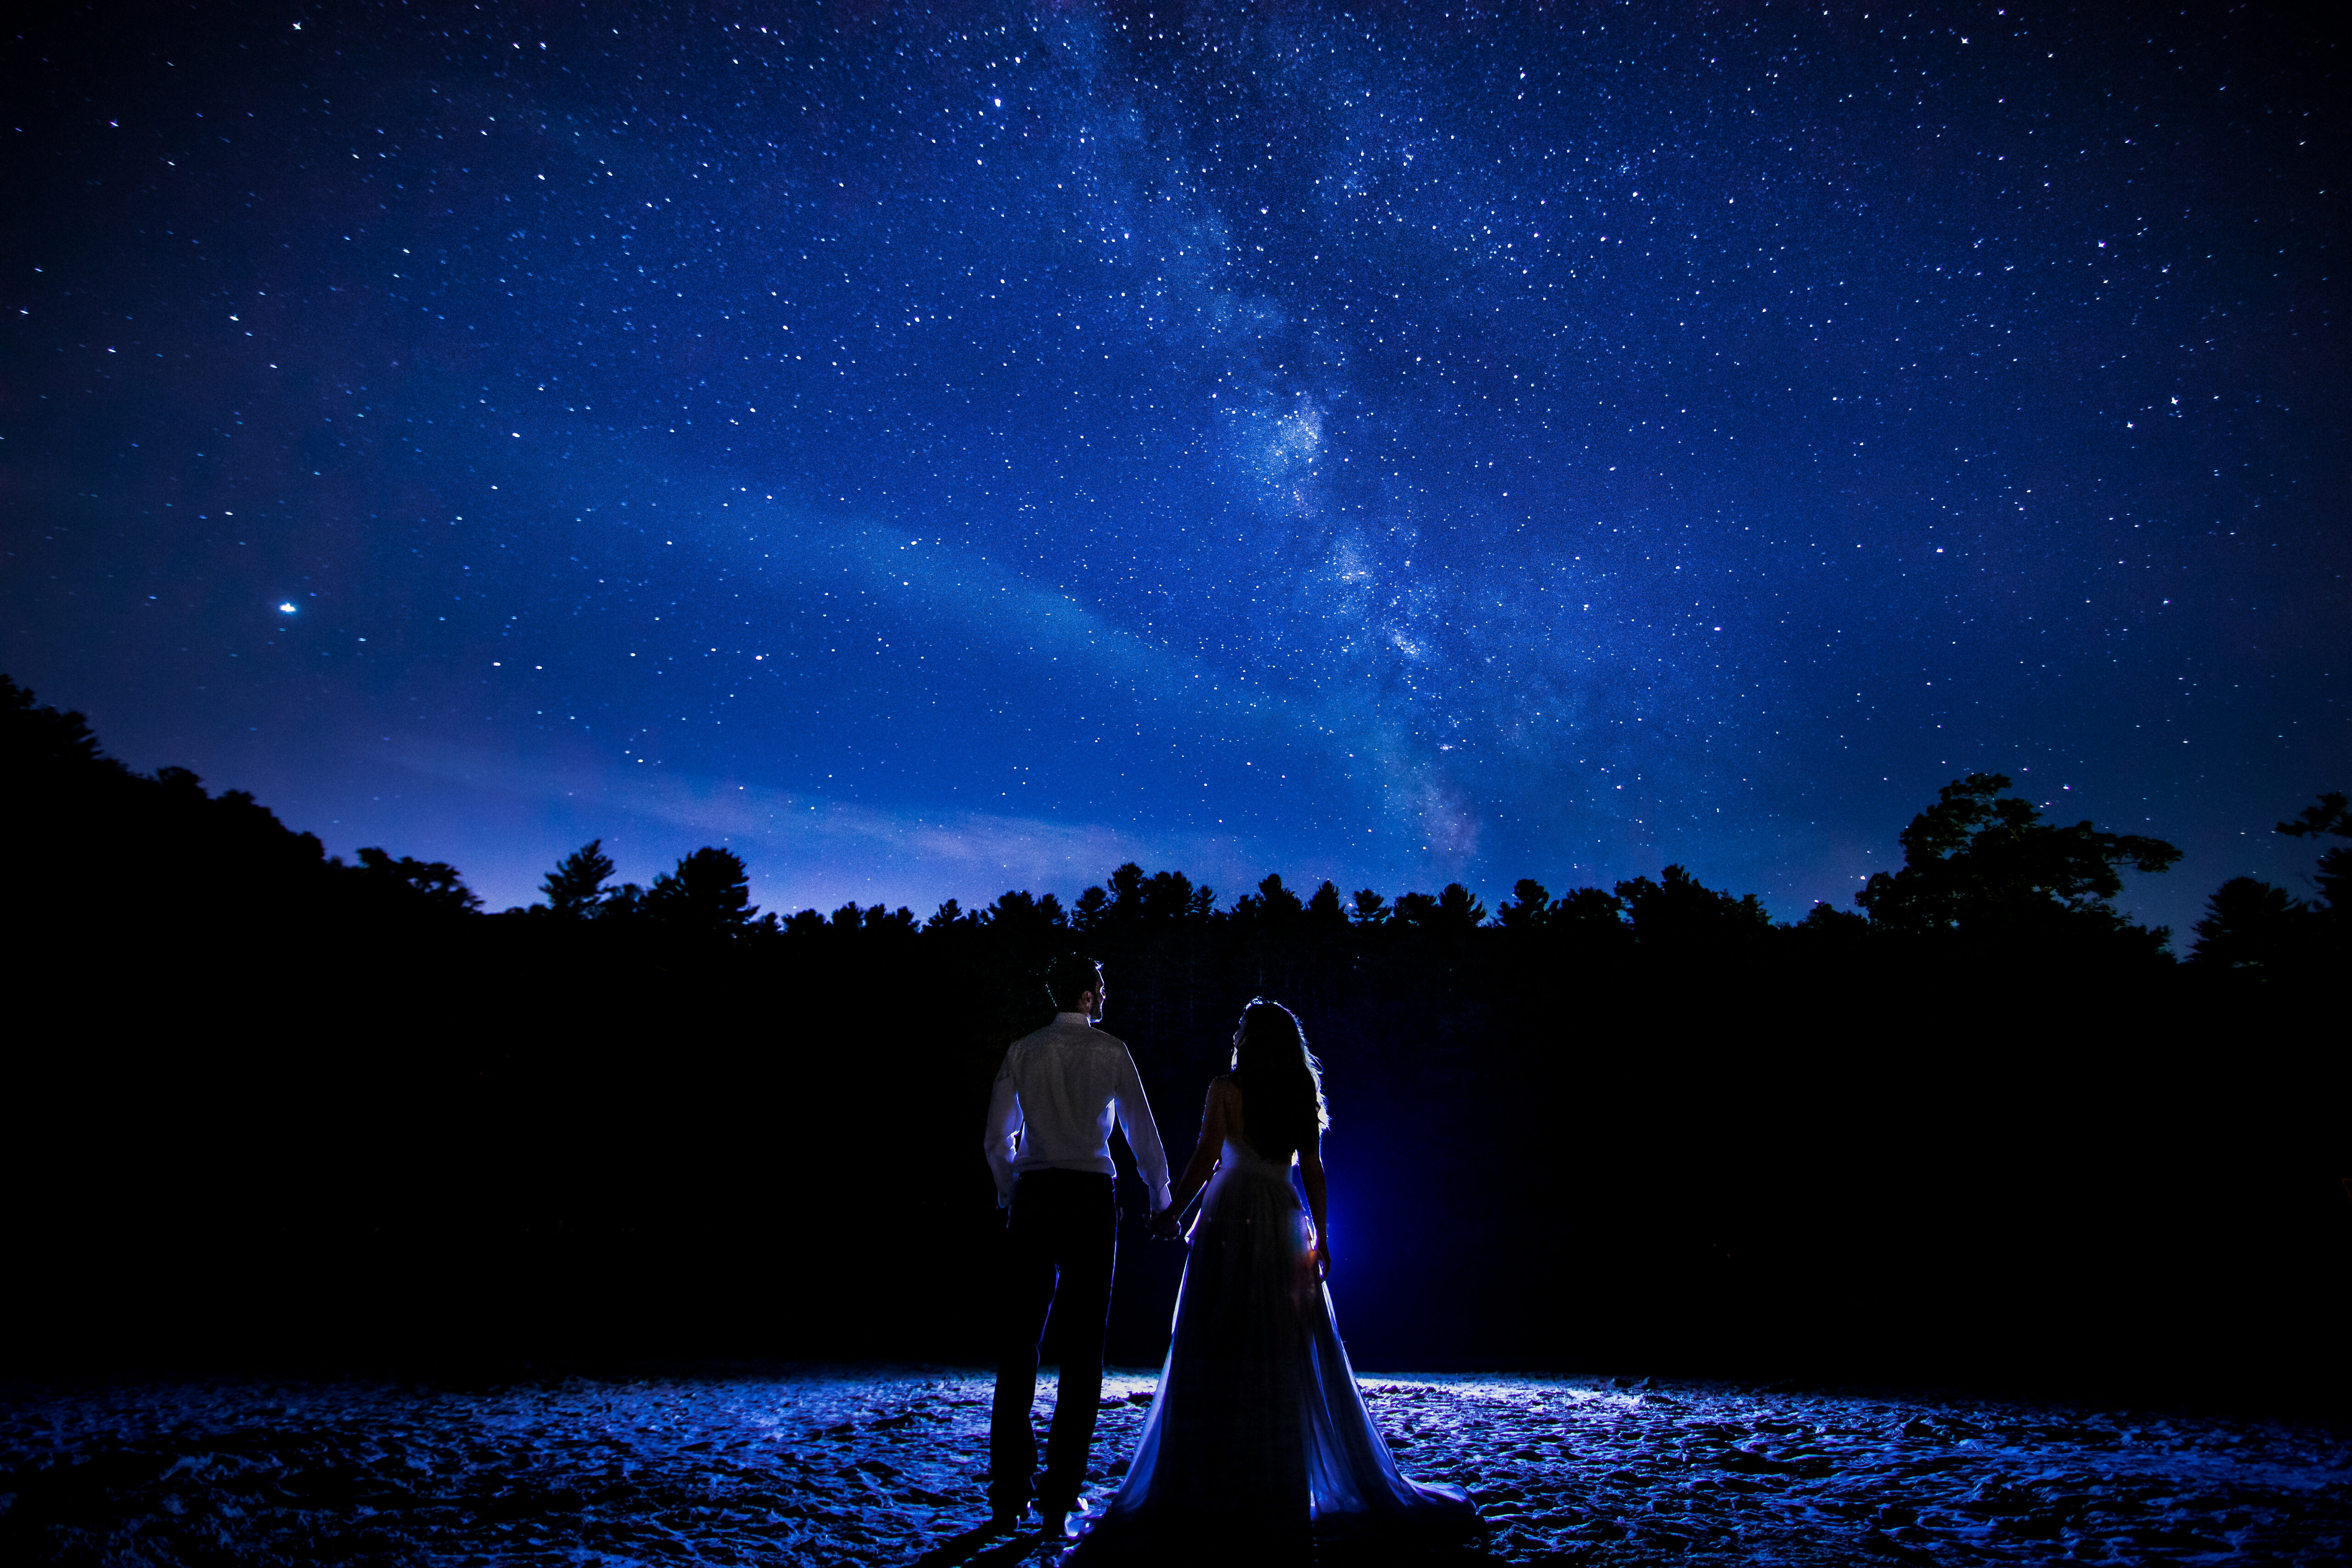 Creative Central PA Engagement Photographer, Lisa Rhinehart, captures this unique, colorful, fun image of the couple holding hands as they stare at the Milky Way during their after session photoshoot